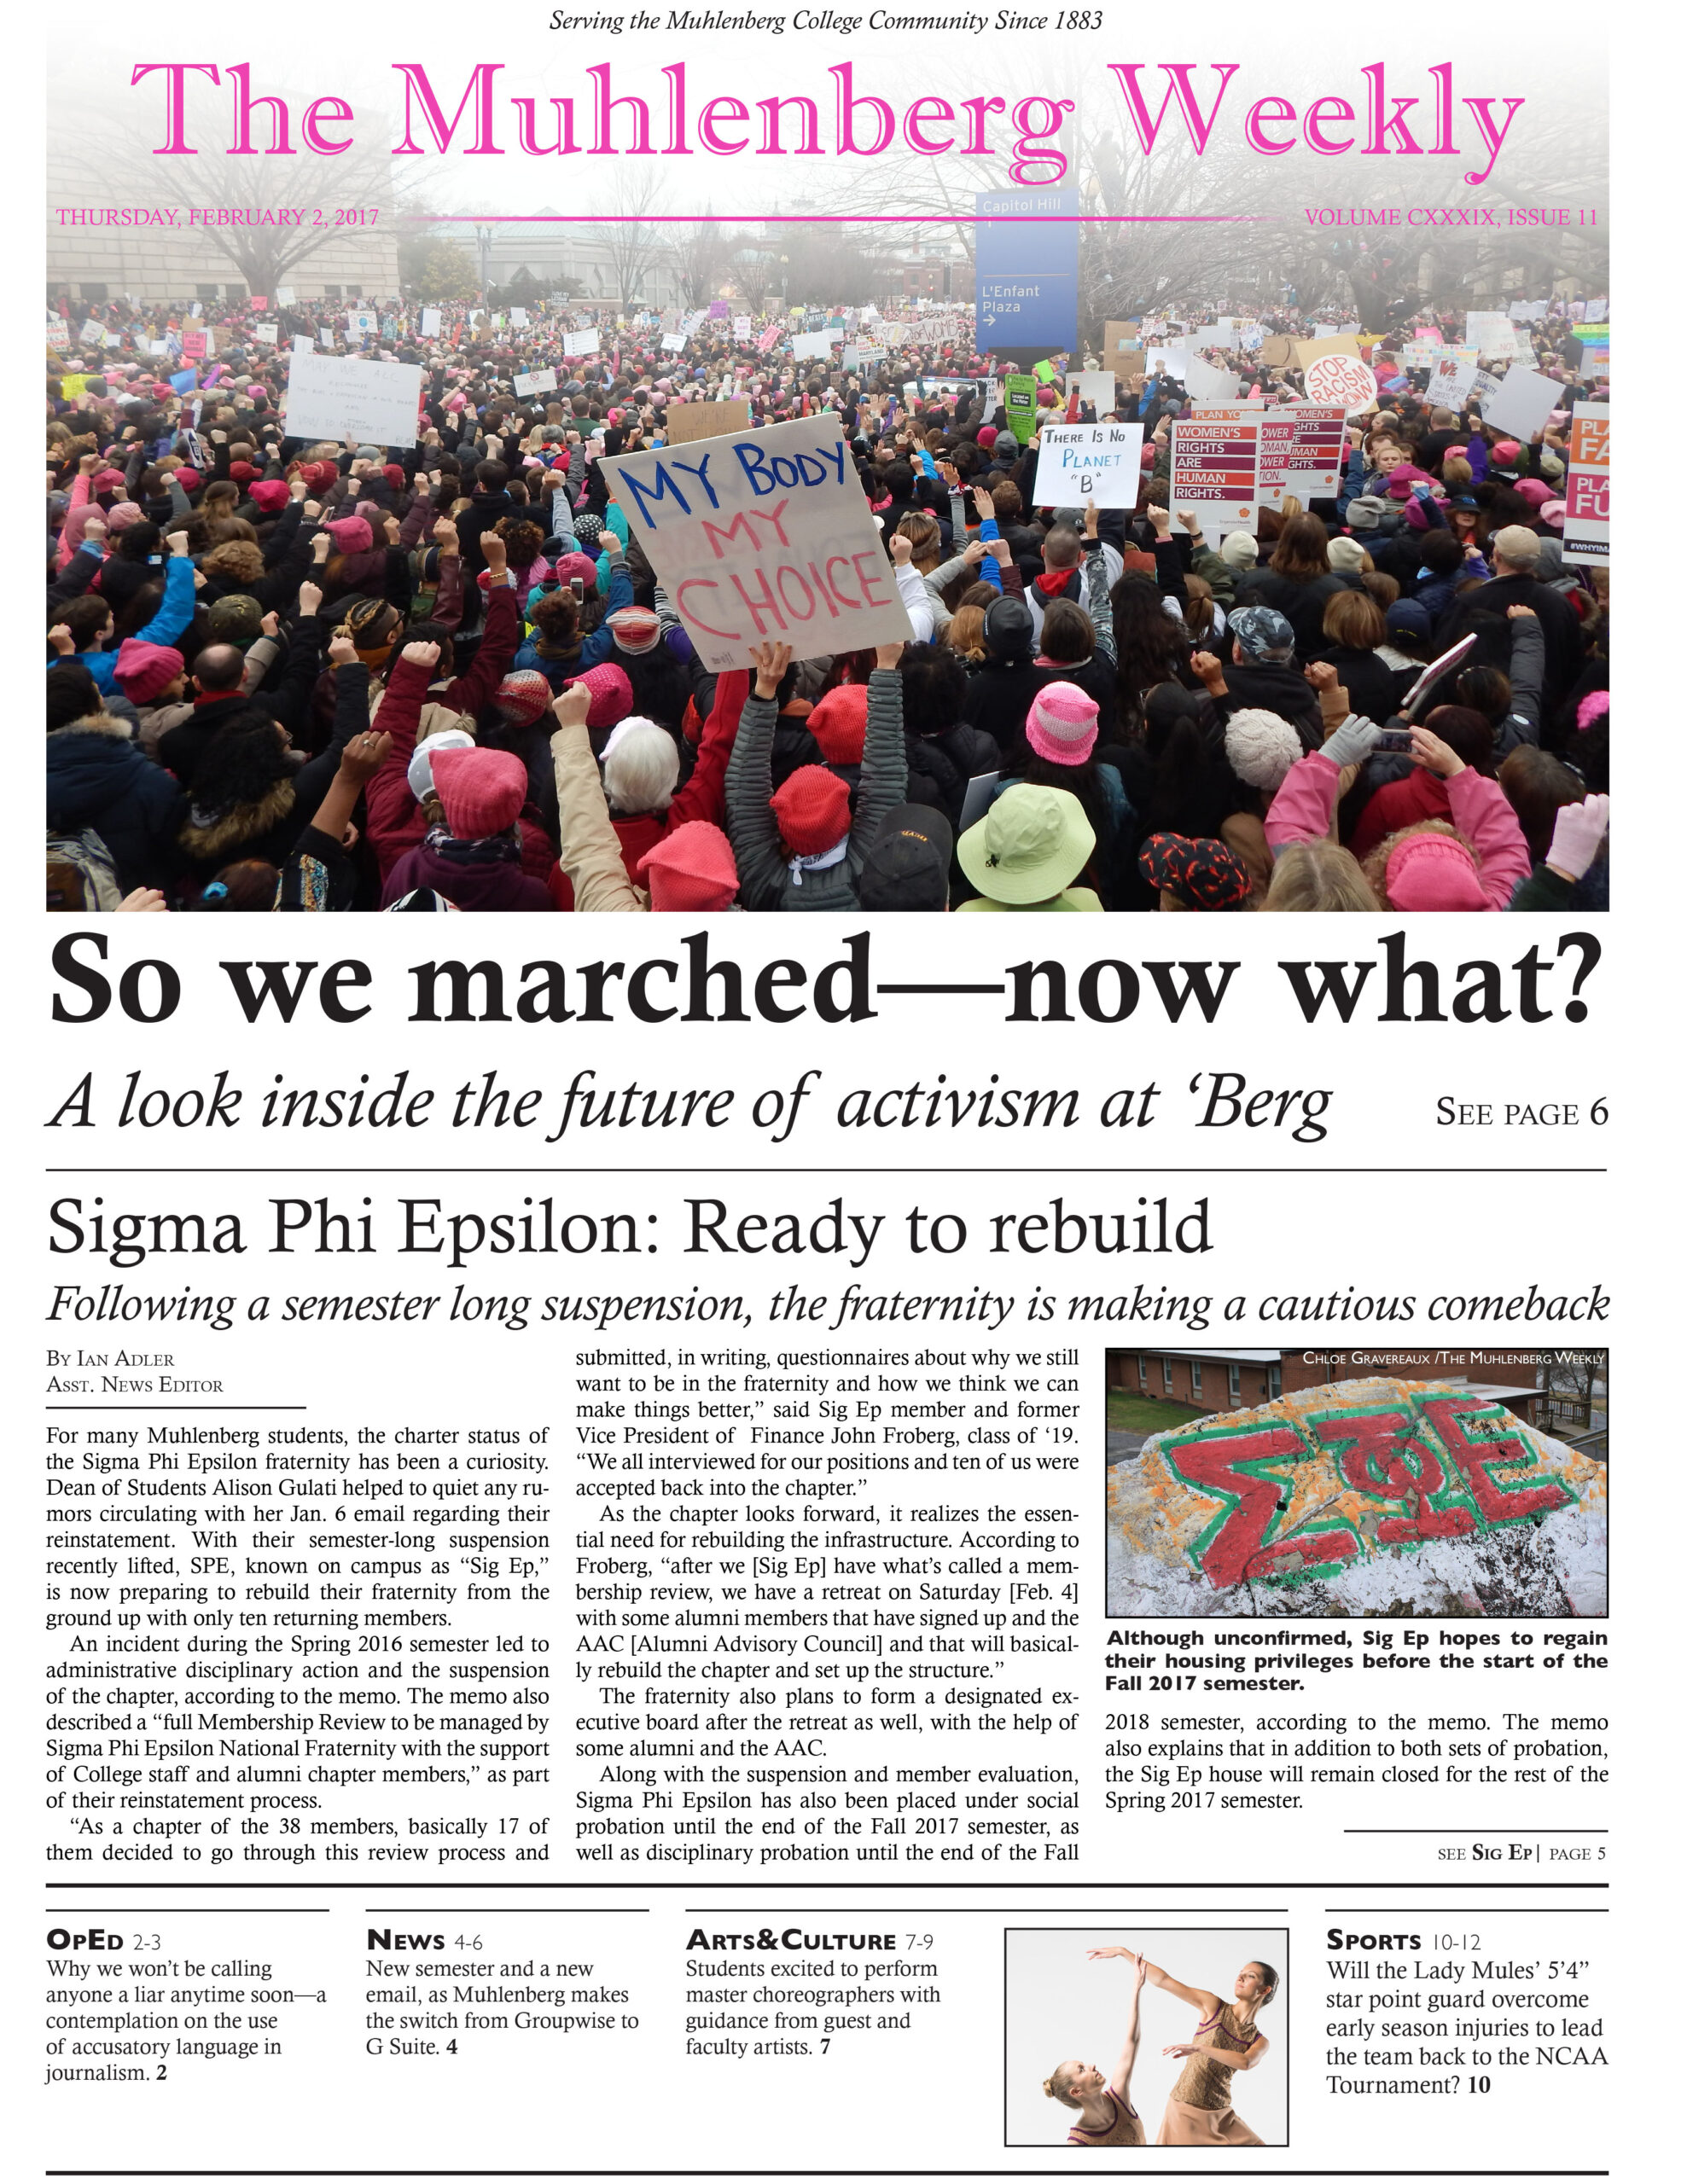 Cover of the "Muhlenberg Weekly" showing the Women's March on Washington, January 2017